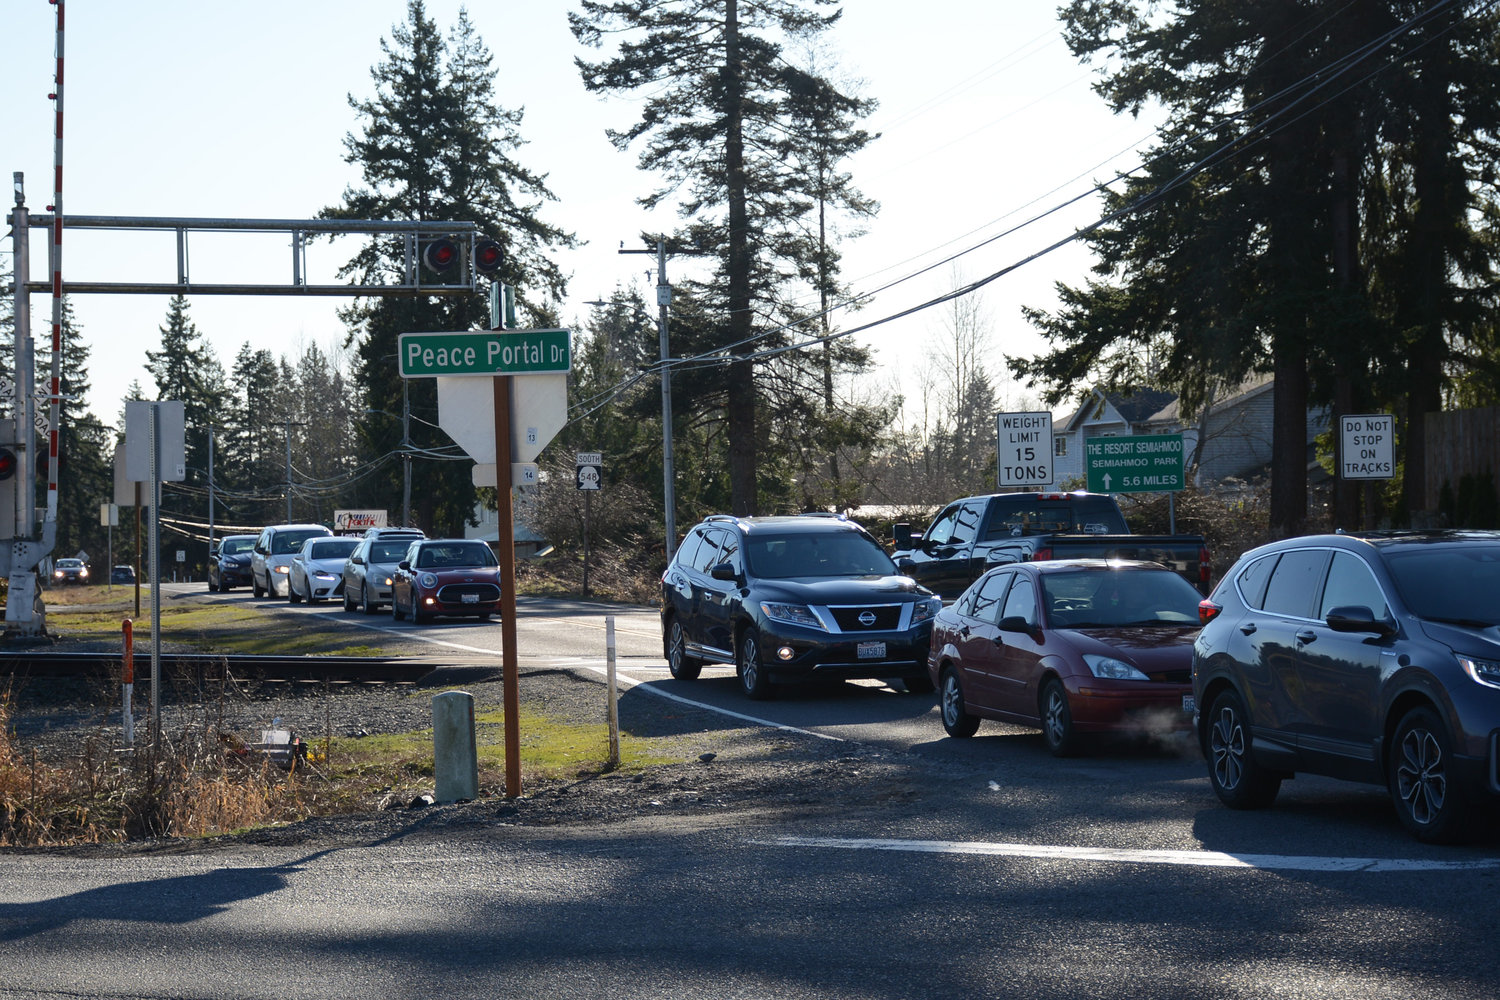 Cars in line at the Bell Road and Peace Portal Drive intersection in January 2021.